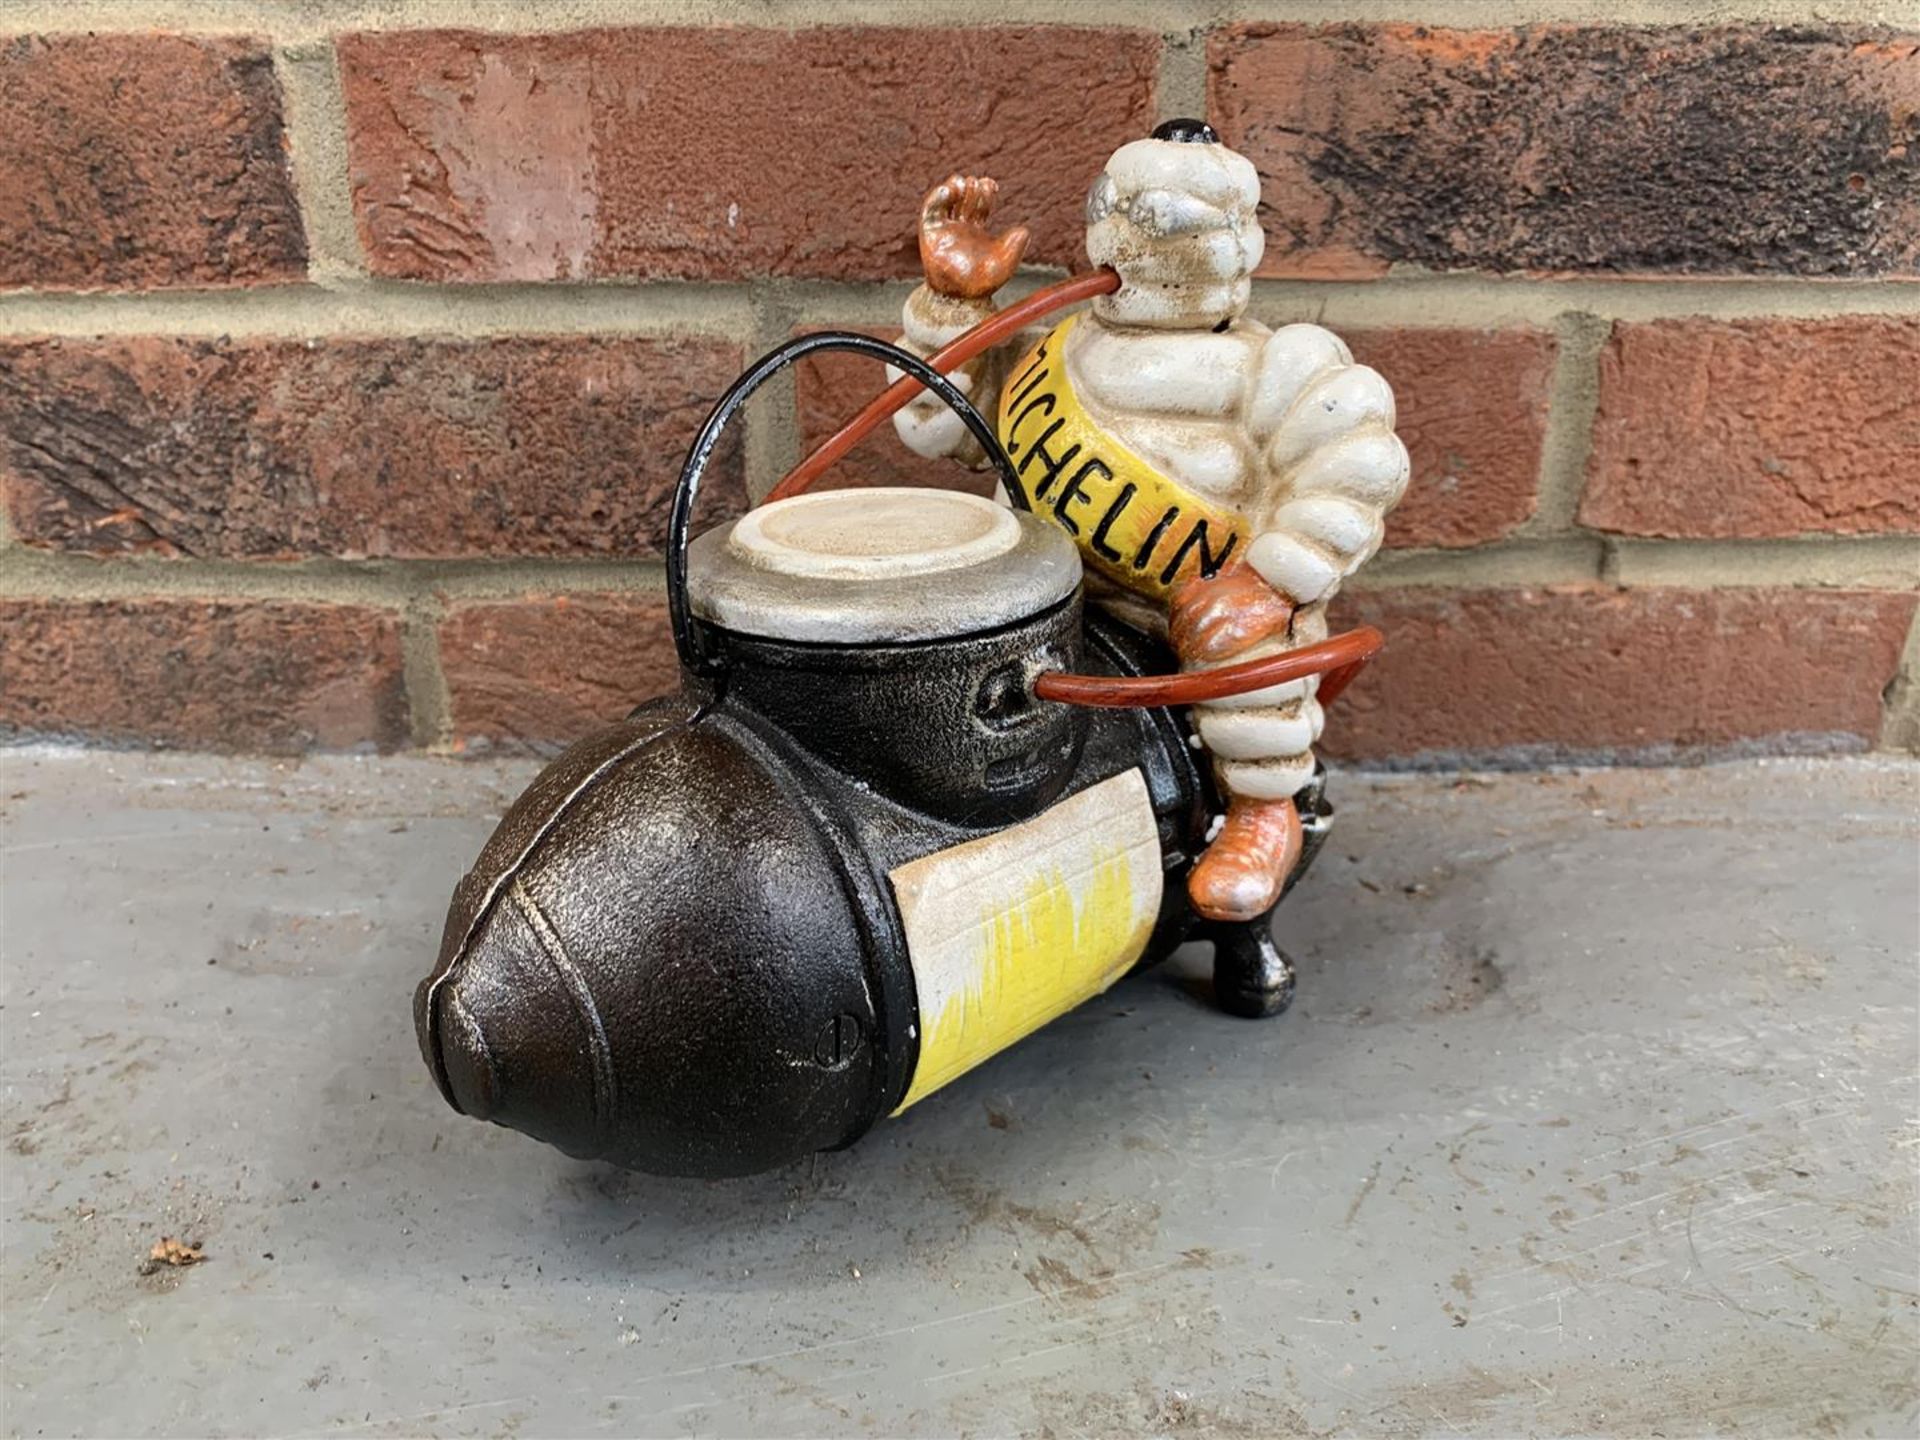 Novelty Cast Michelin Storage Container - Image 2 of 2